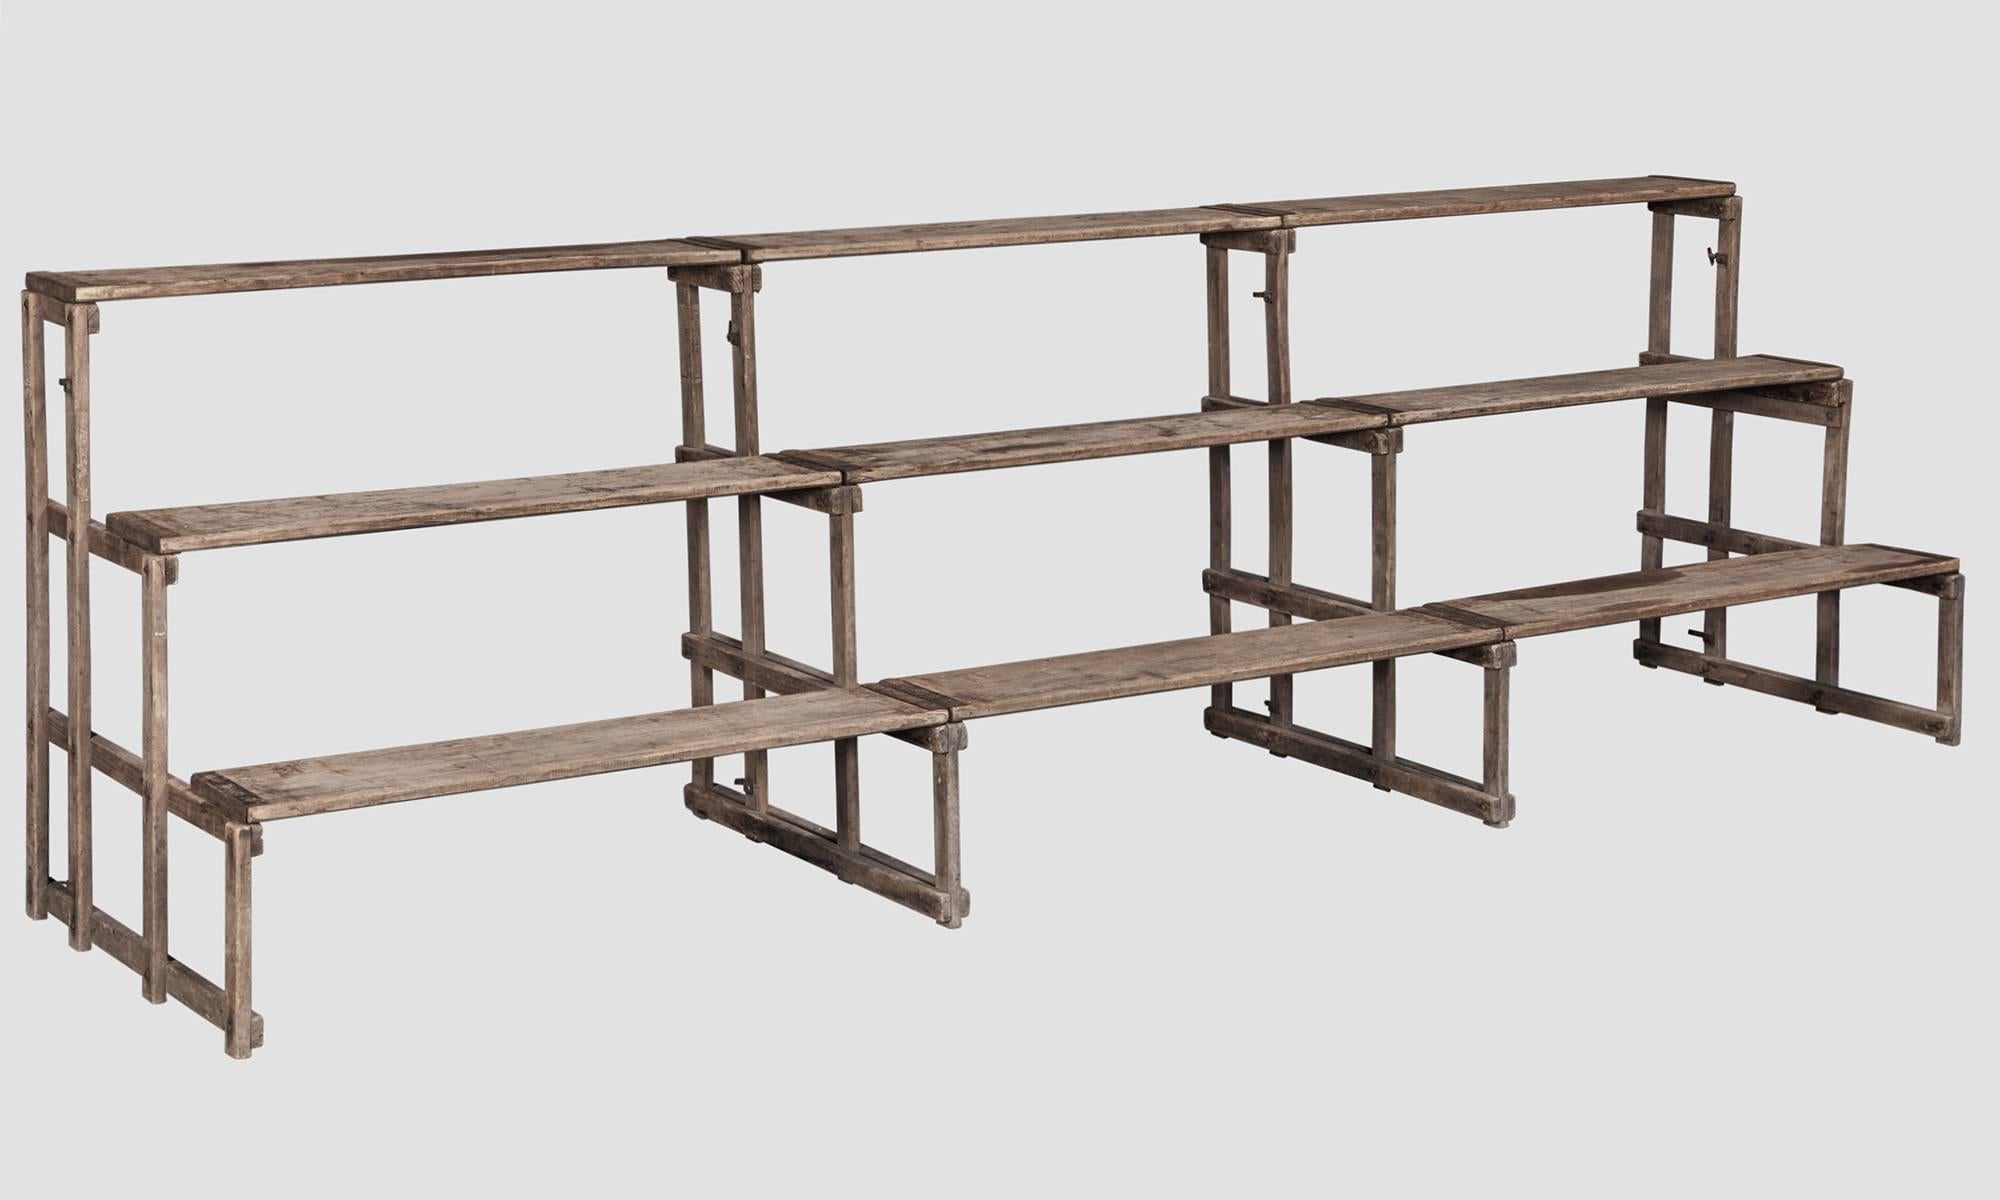 Series of five connecting pinewood bleachers with iron supports. Three pictured. Sold as a set.